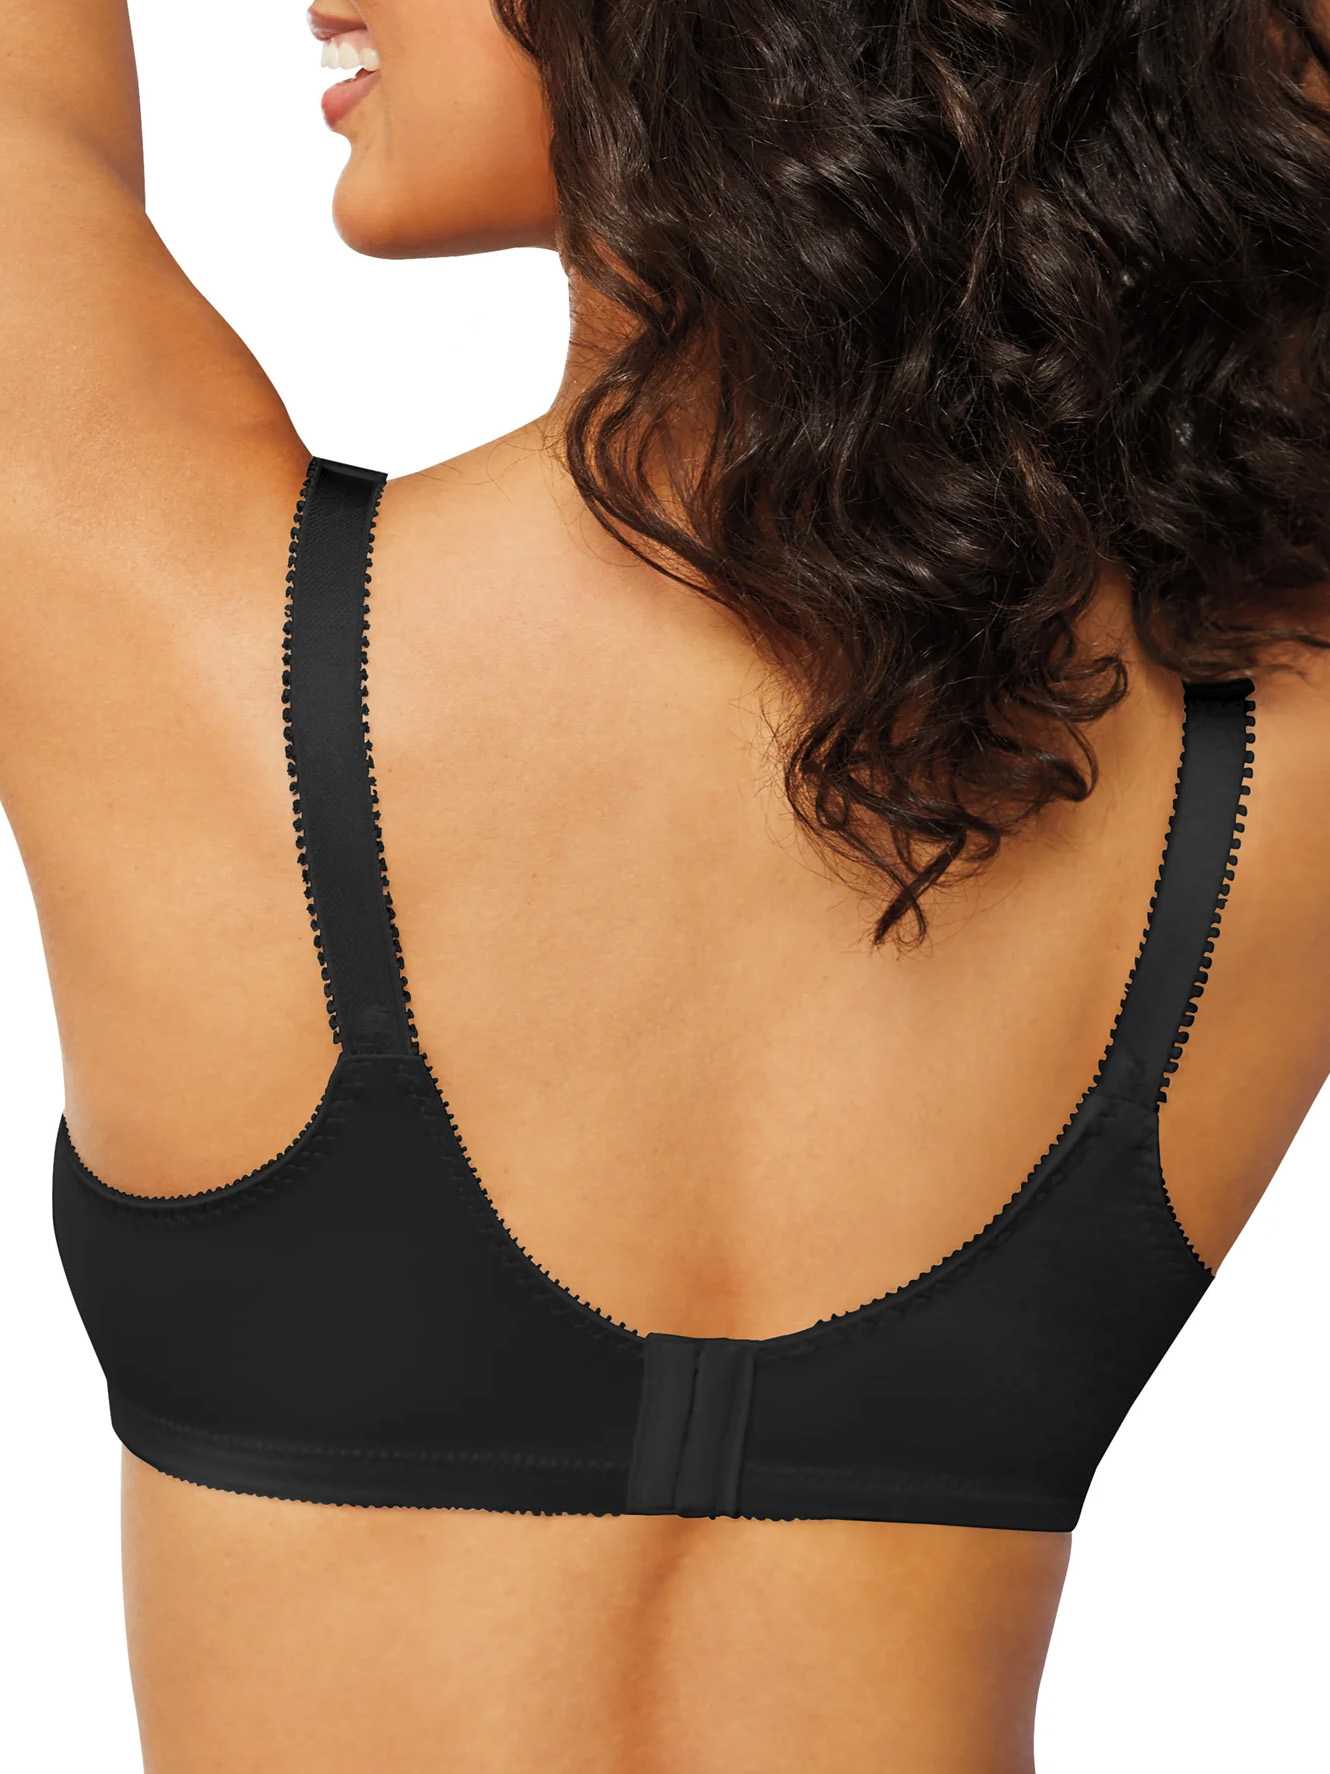 Bali Women's Wirefree Double Support Soft Cup Bra 3820